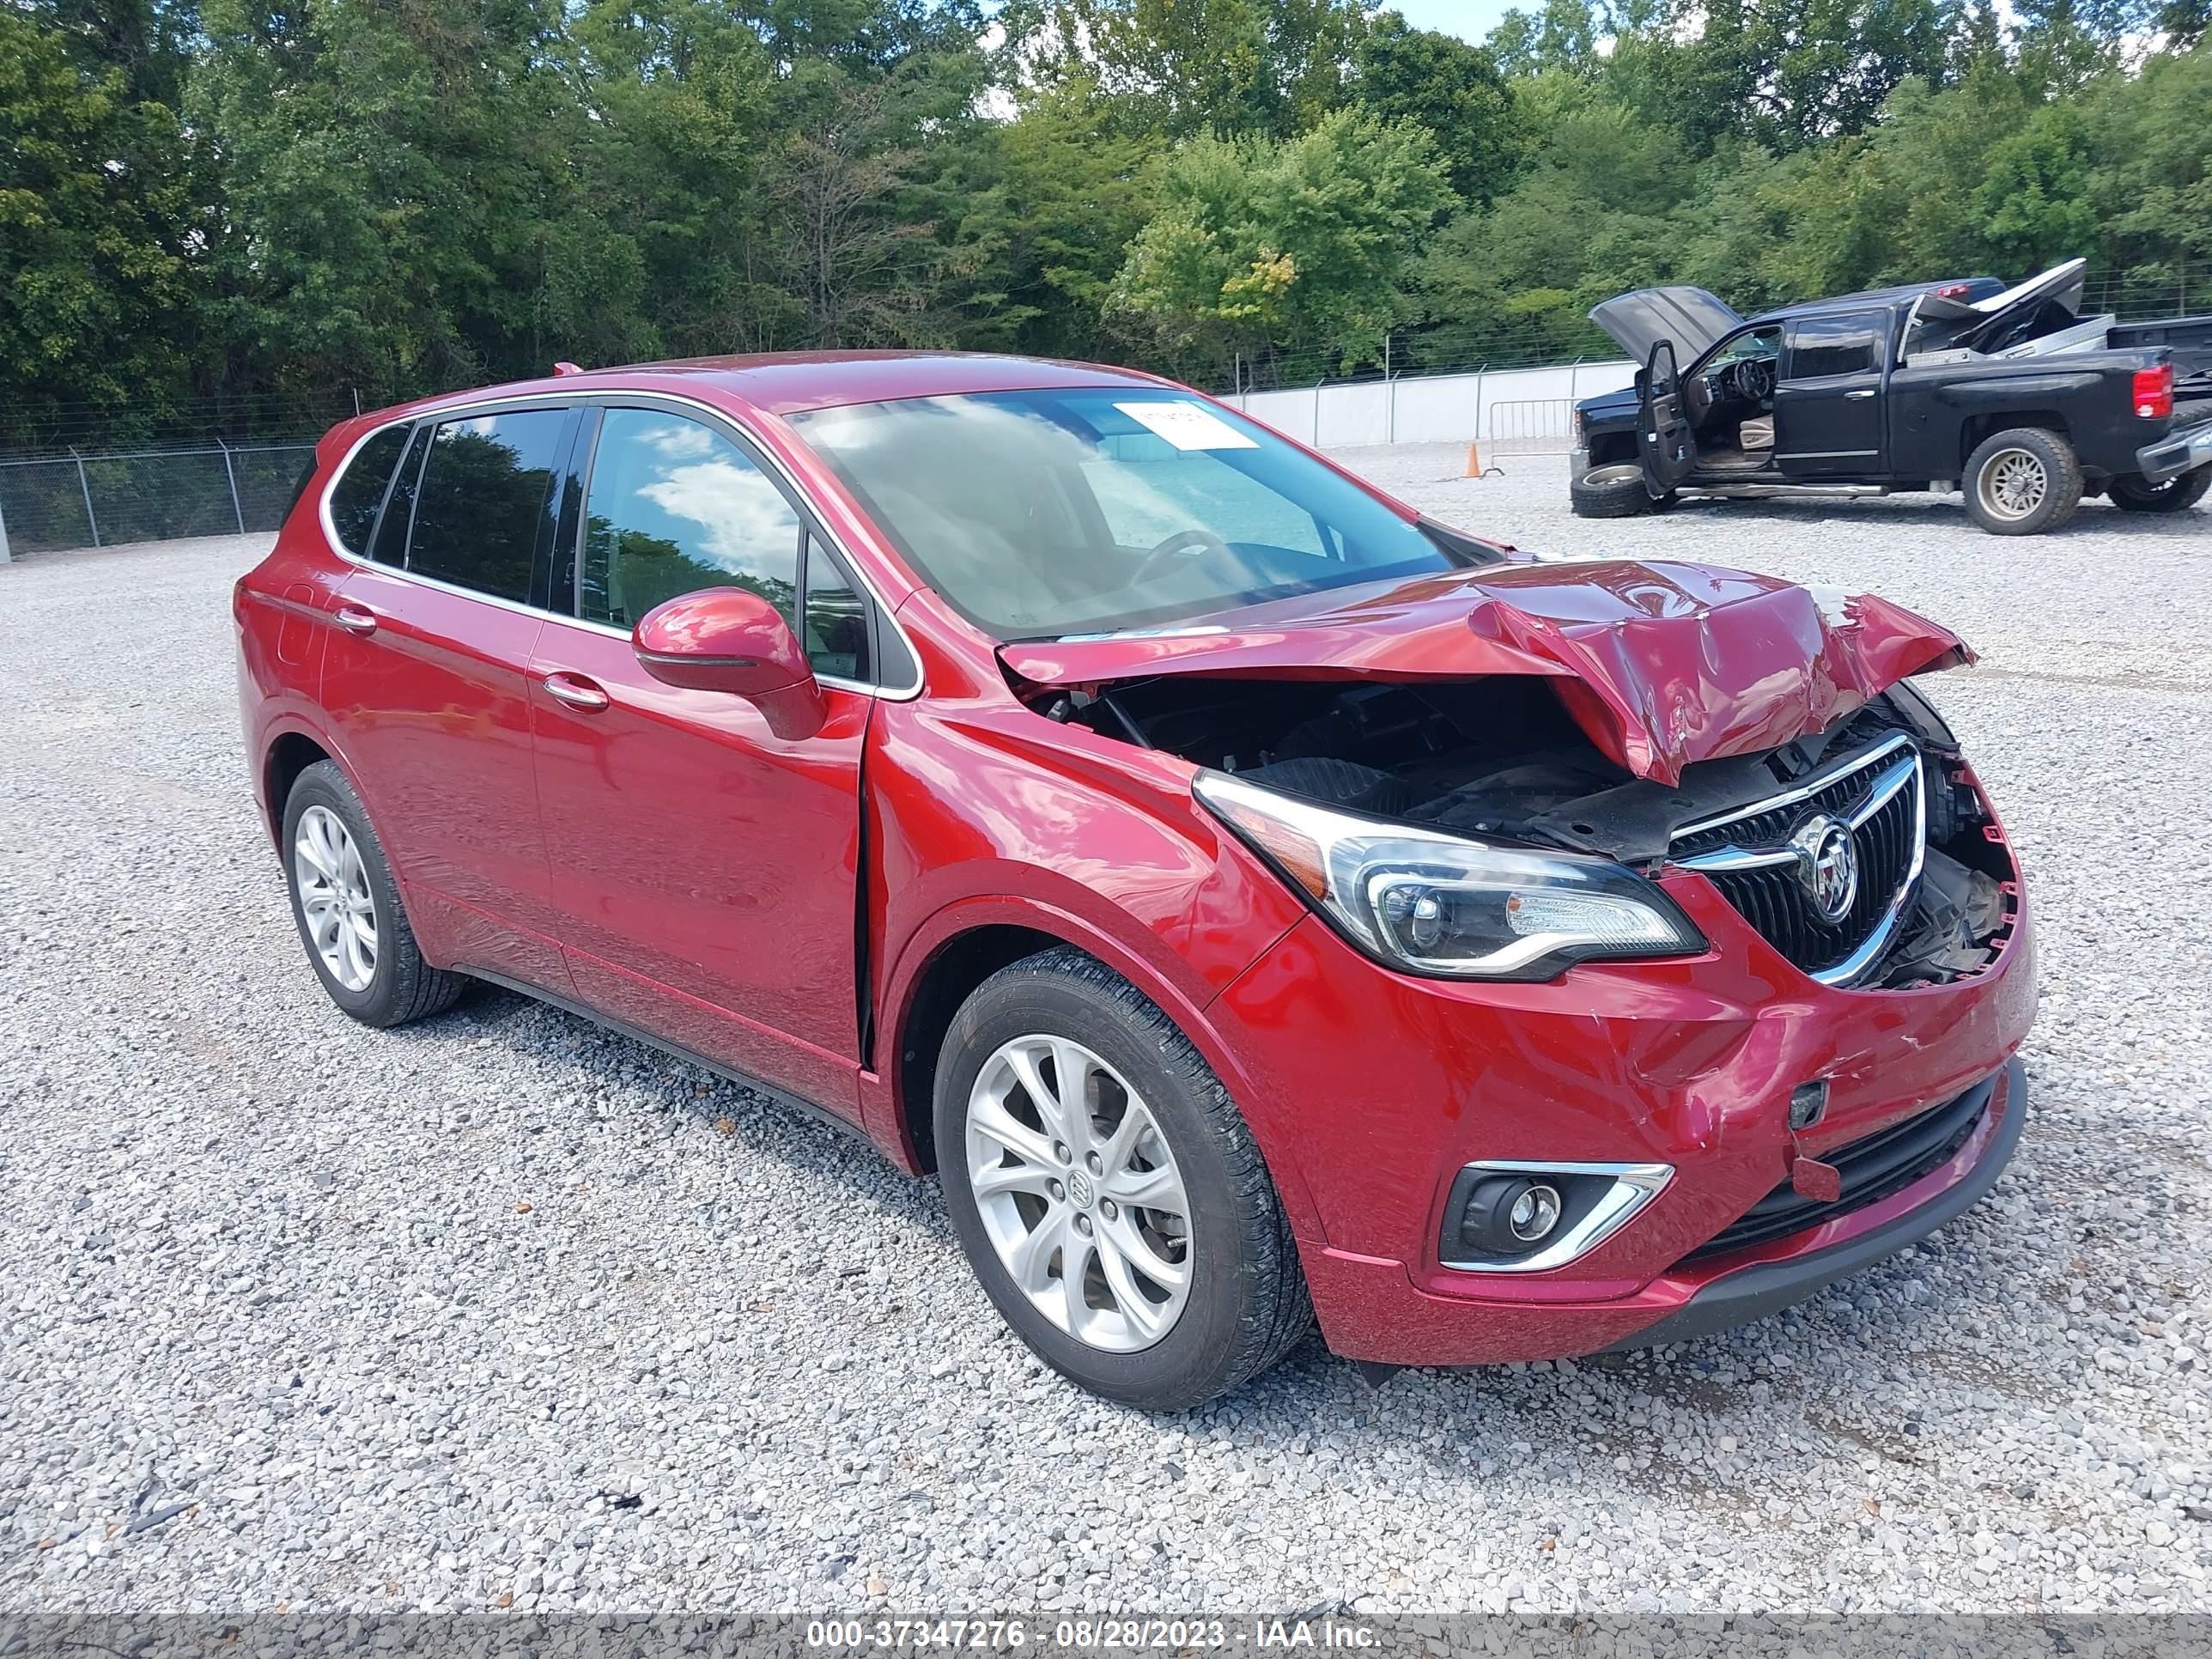 VIN: LRBFXBSA6KD022764 - buick envision